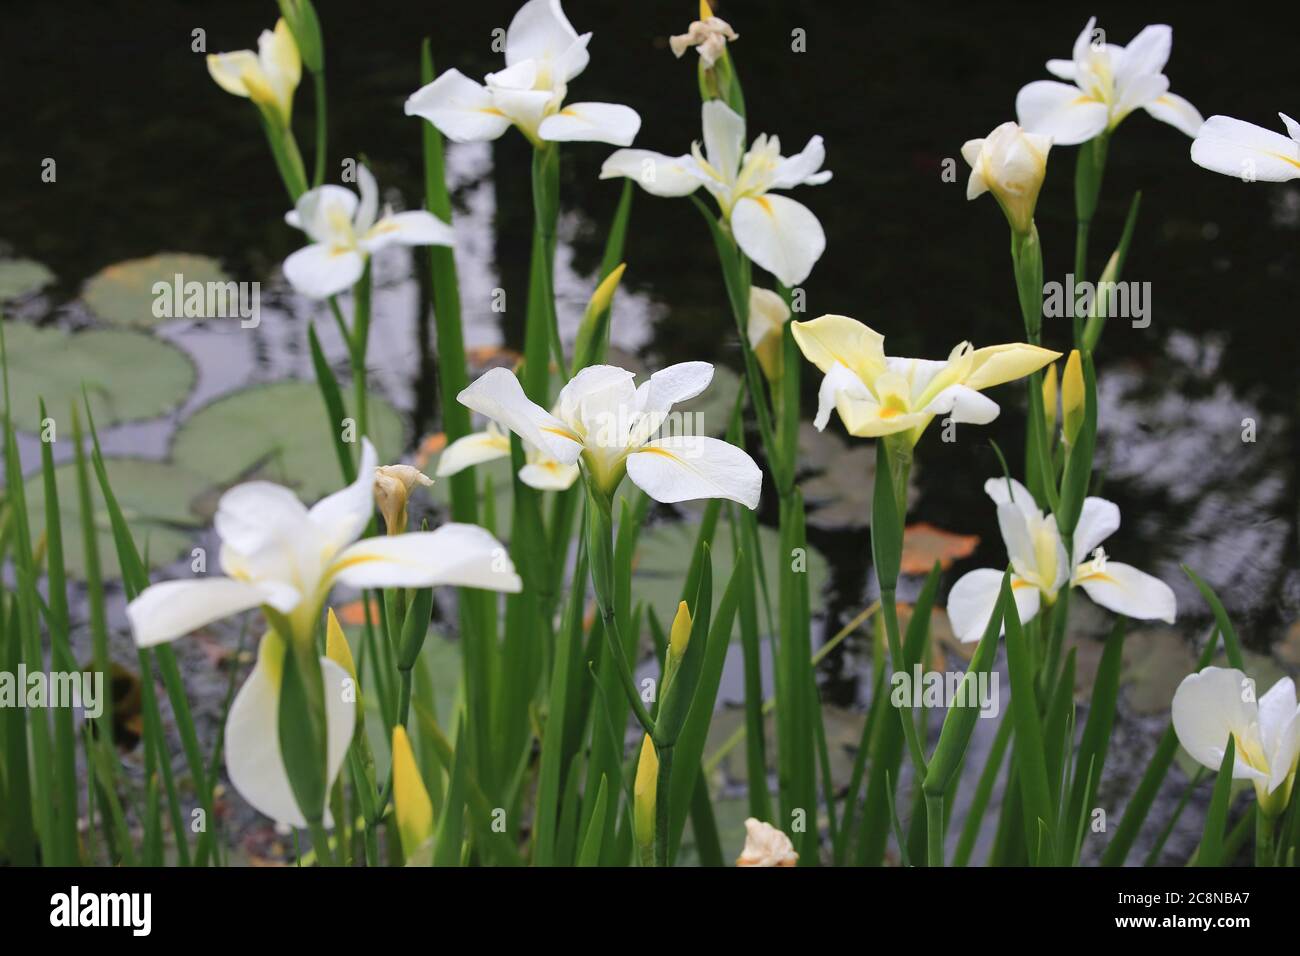 Ginger lily(Butterfly ginger,Butterfly lily,Garland flower),beautiful white with yellow flowers blooming in the garden in spring Stock Photo